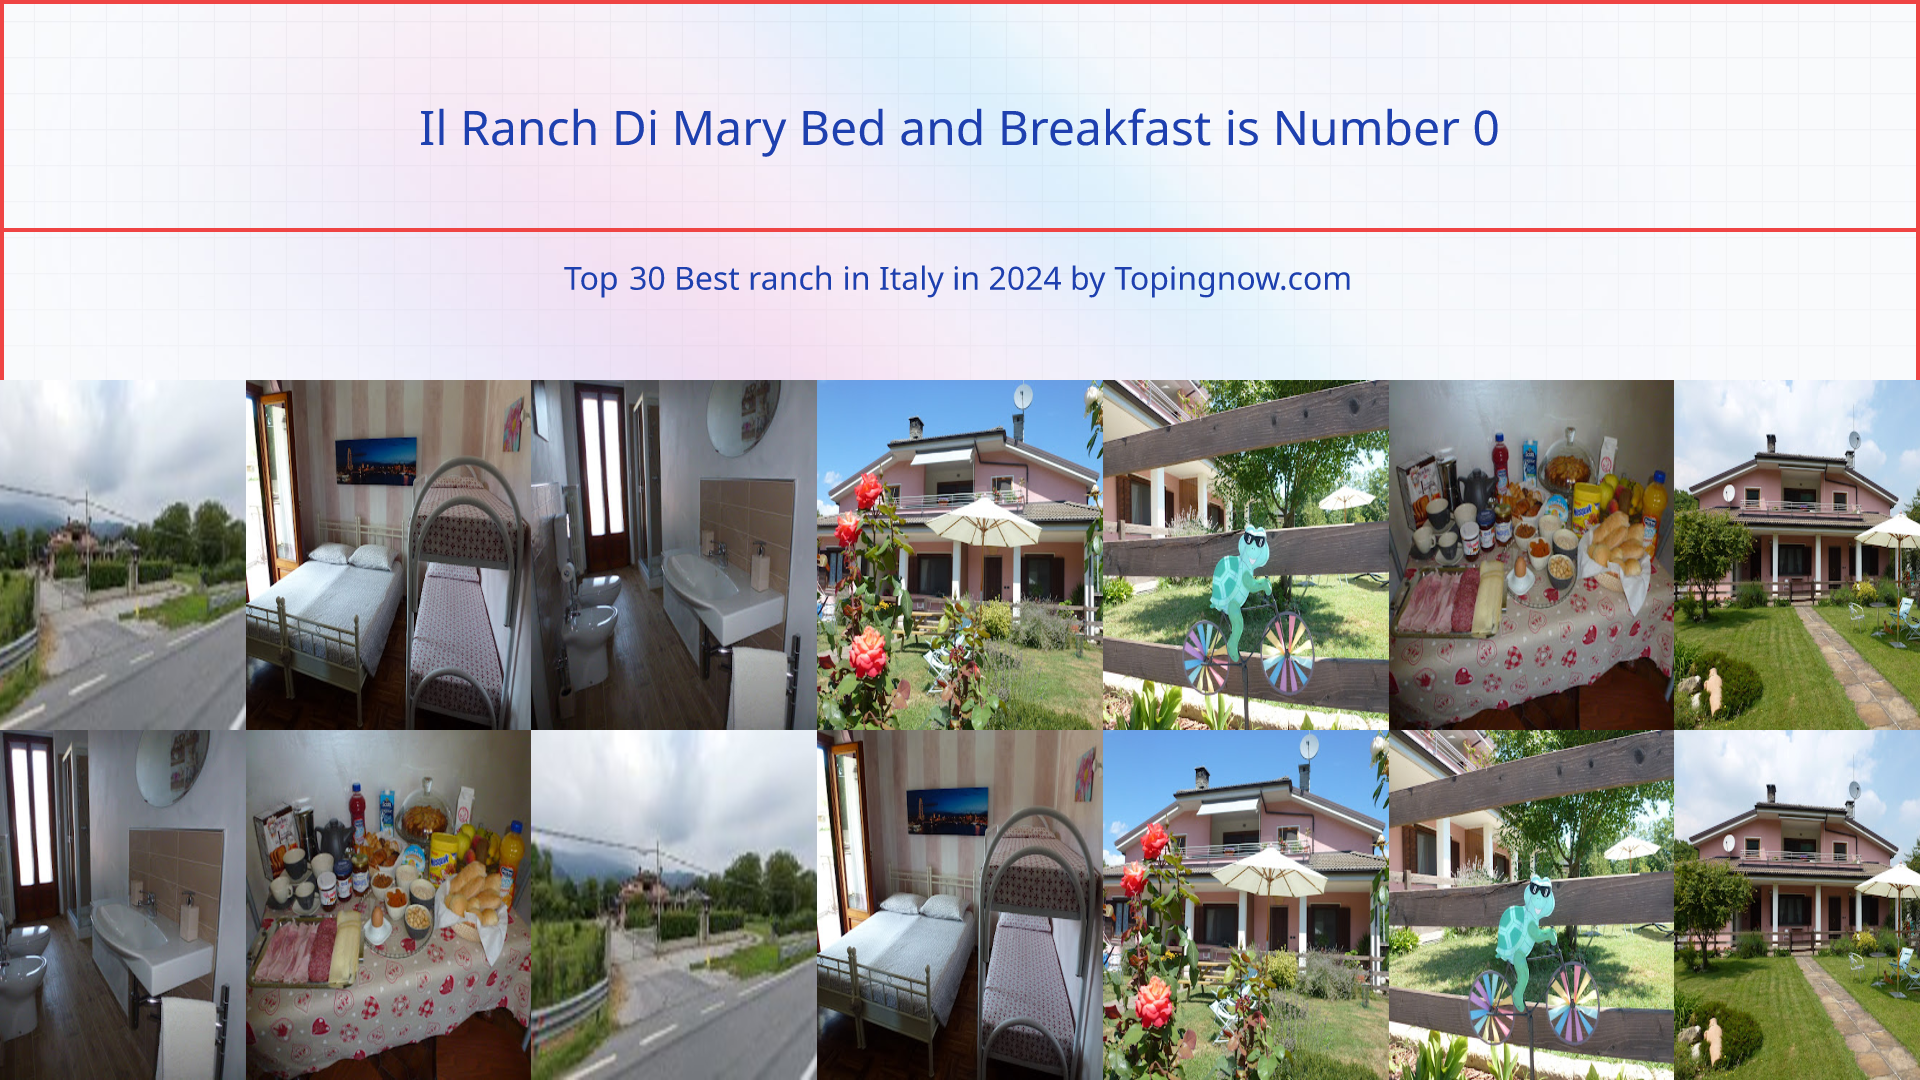 Il Ranch Di Mary Bed and Breakfast: Top 30 Best ranch in Italy in 2024